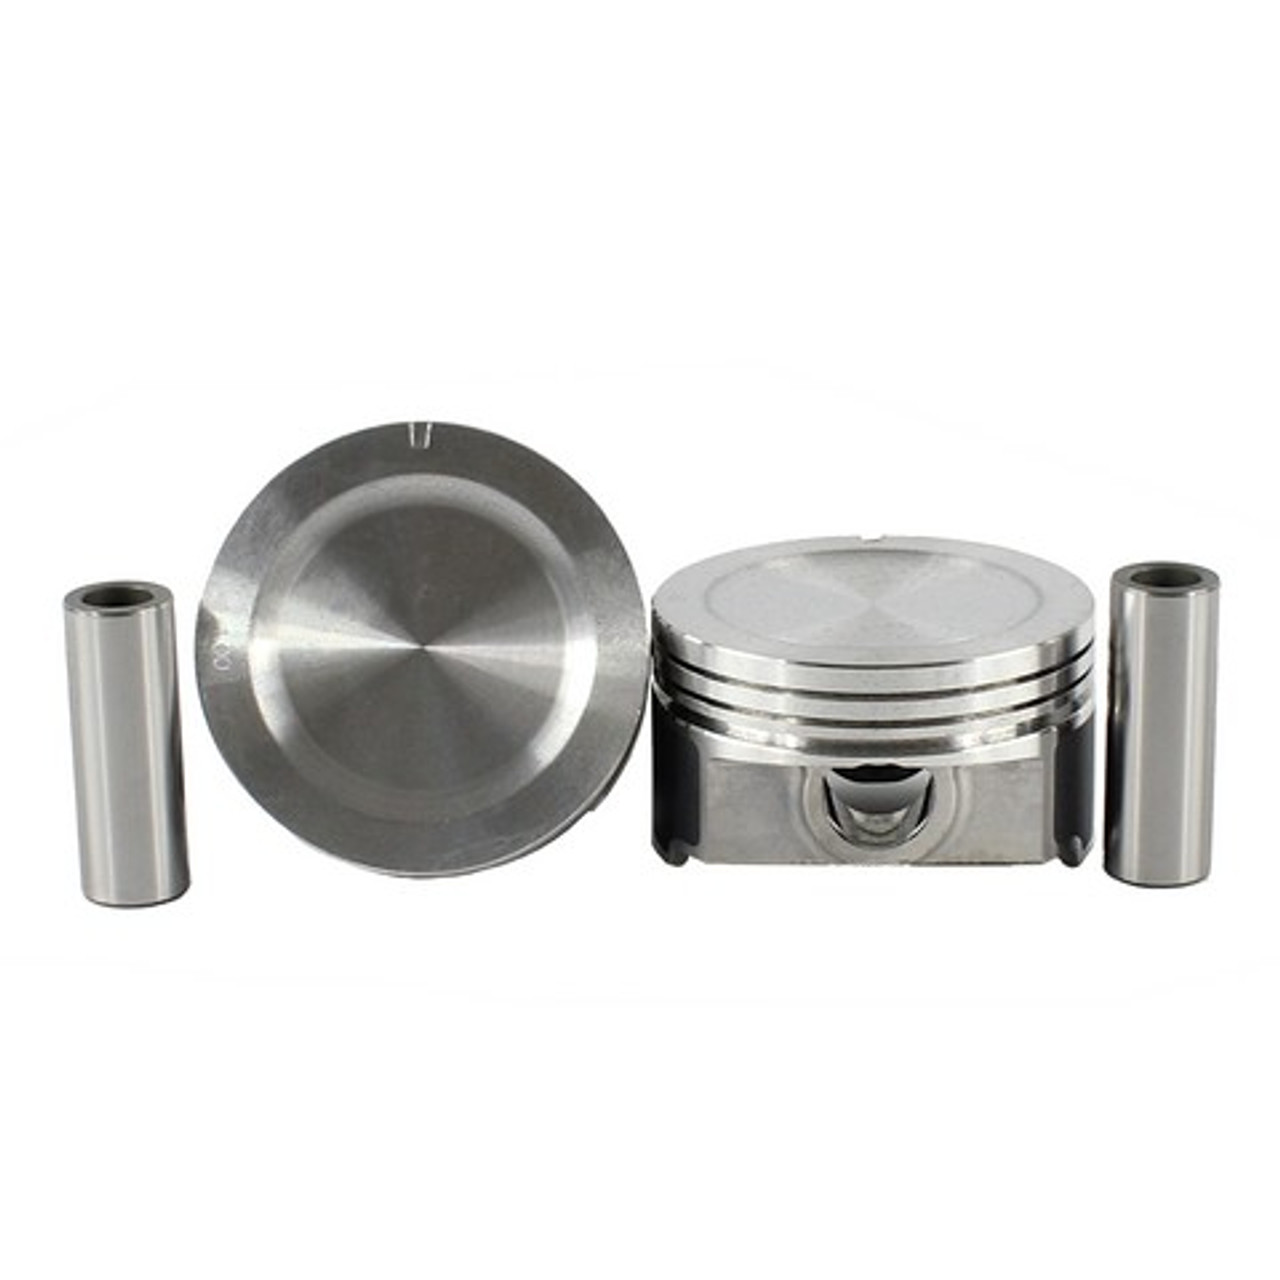 Piston Set 5.4L 1997 Ford Expedition - P4160.73